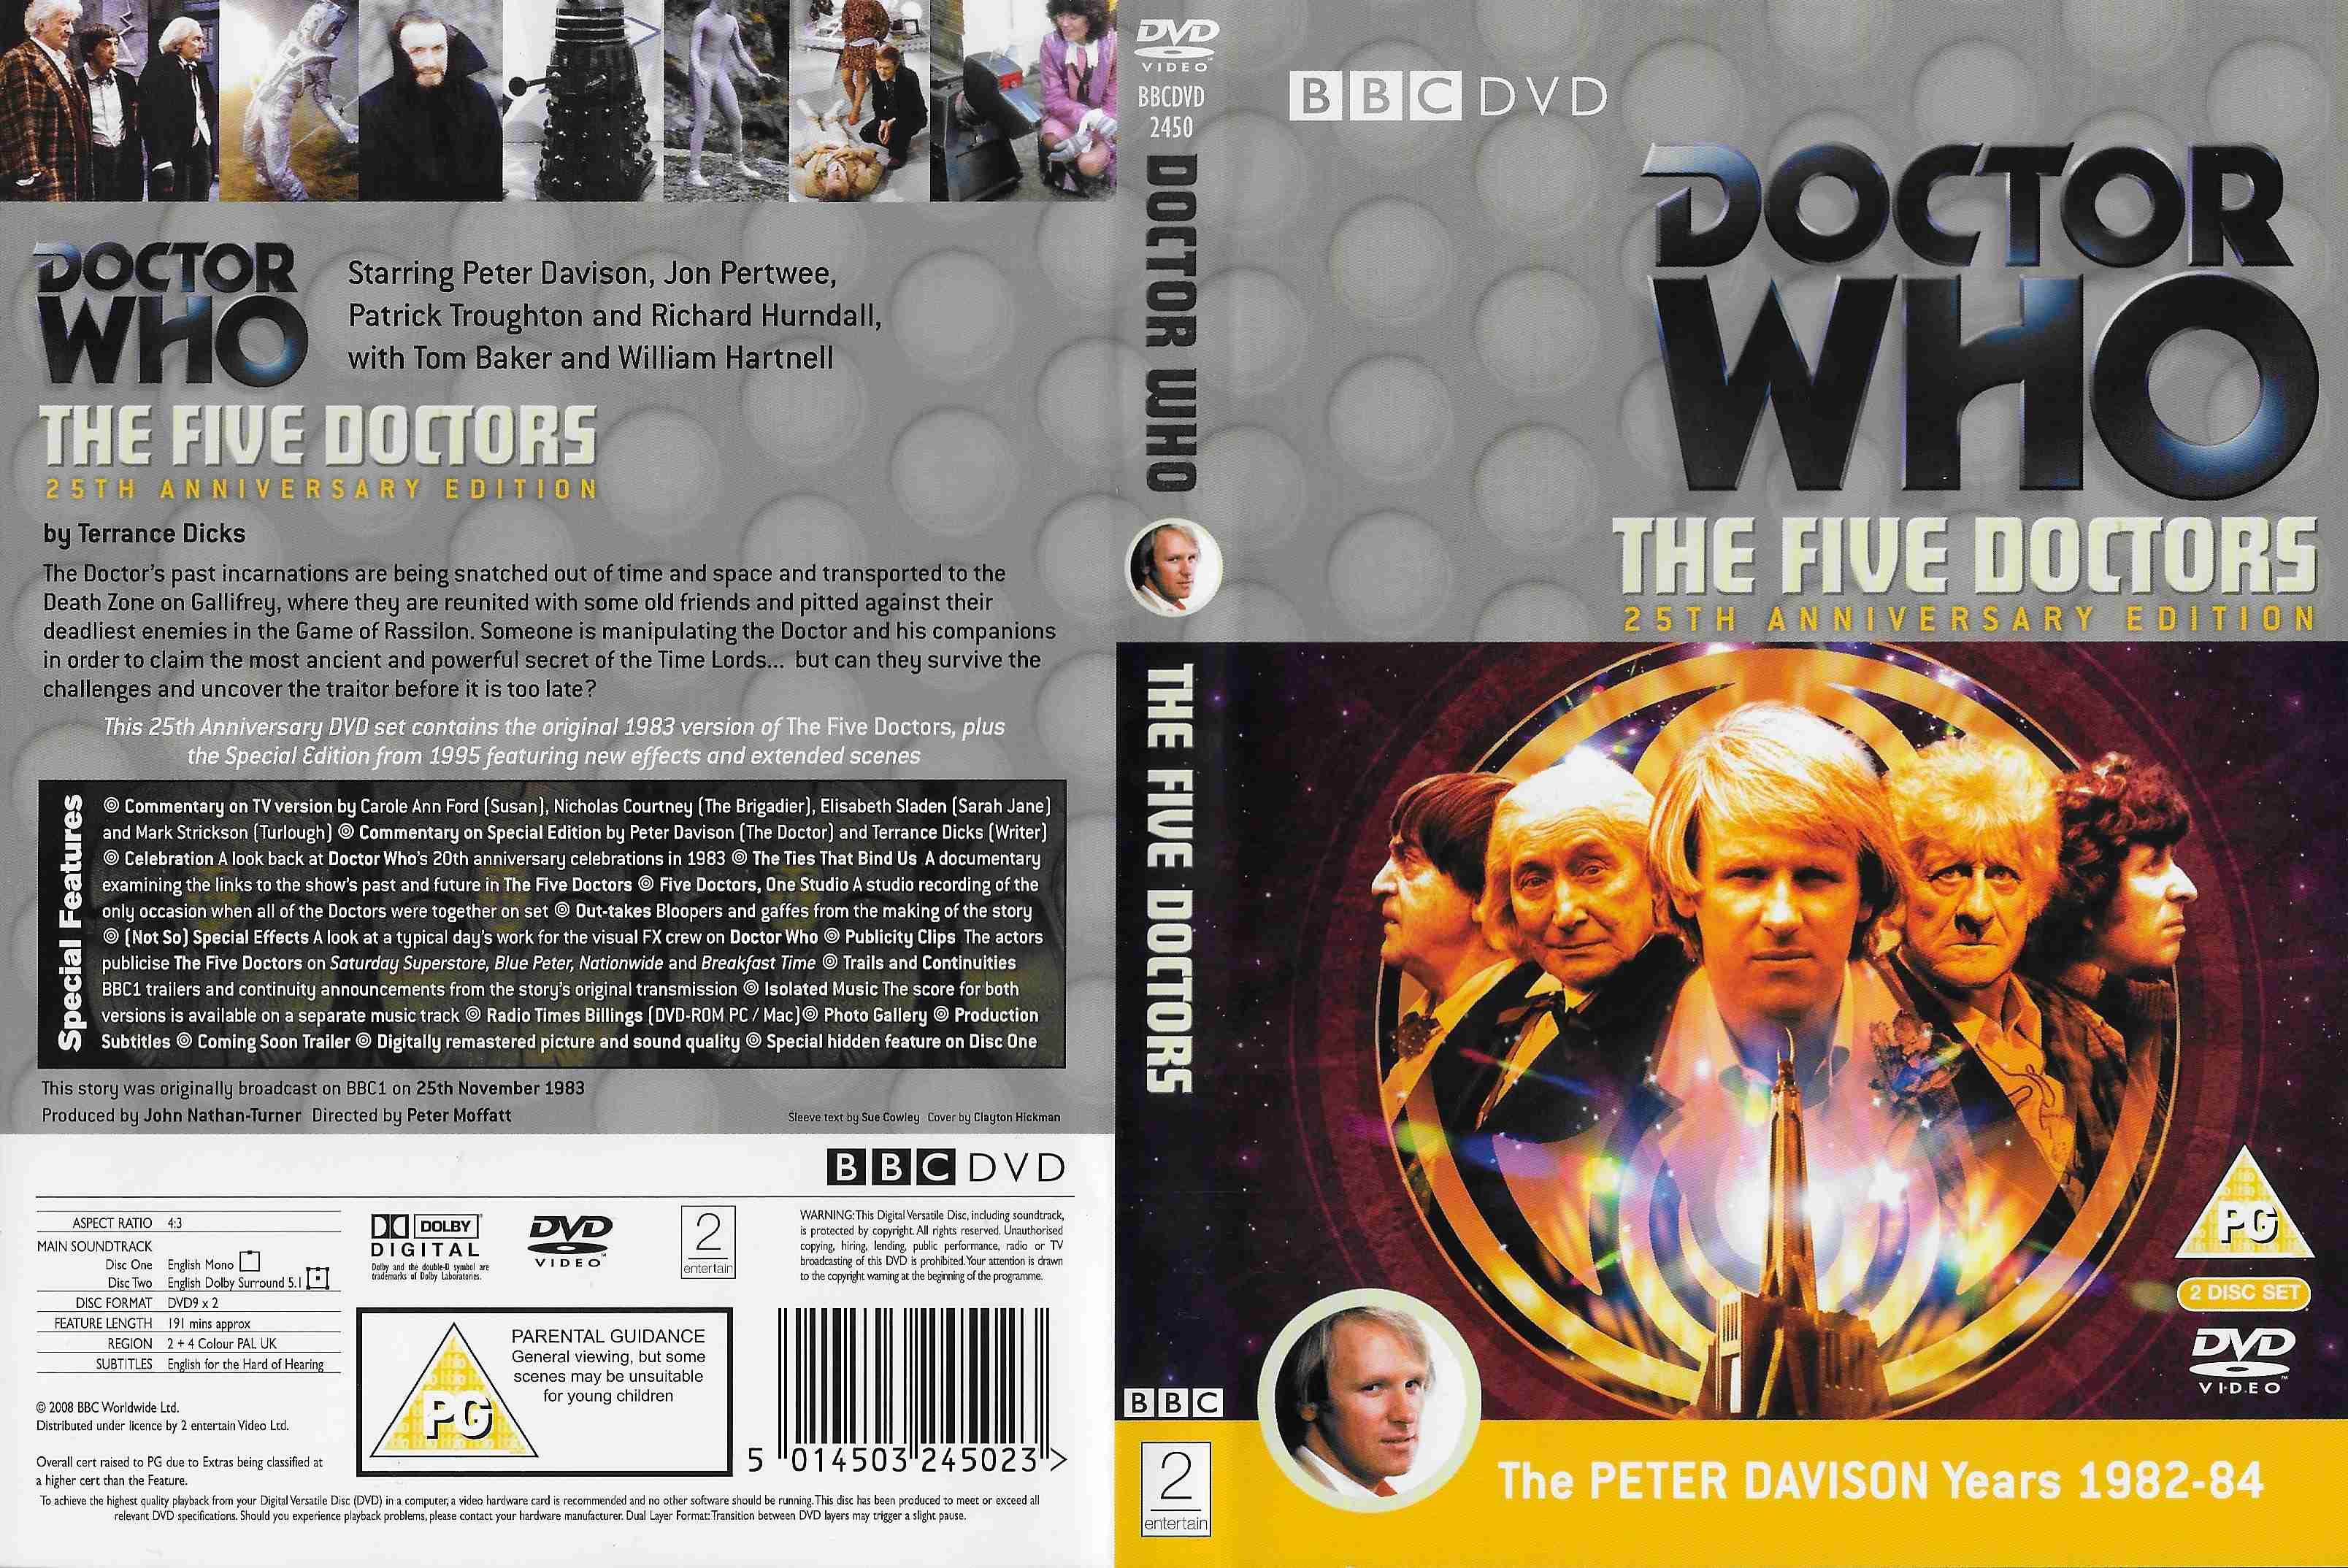 Front cover of BBCDVD 2450